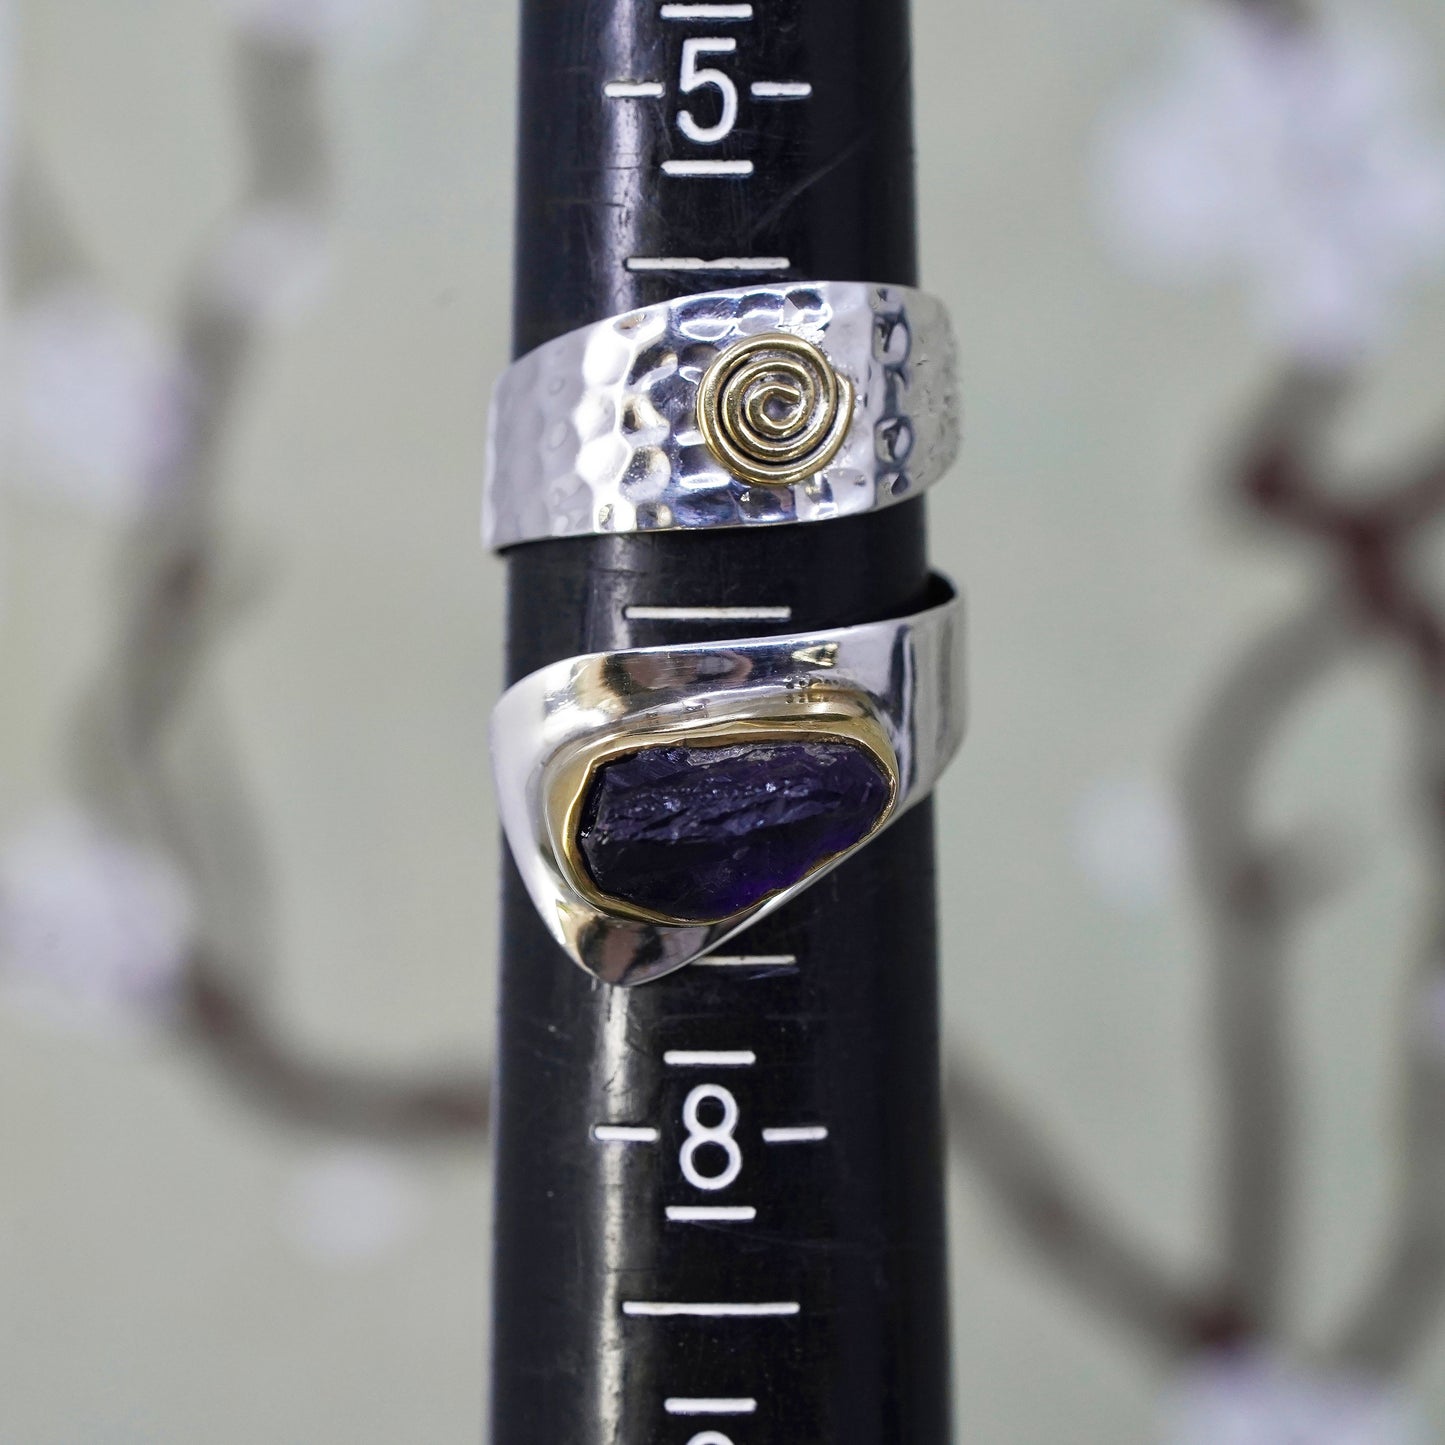 Size adjustable, VTG two tone sterling 925 silver wrap band ring with amethyst